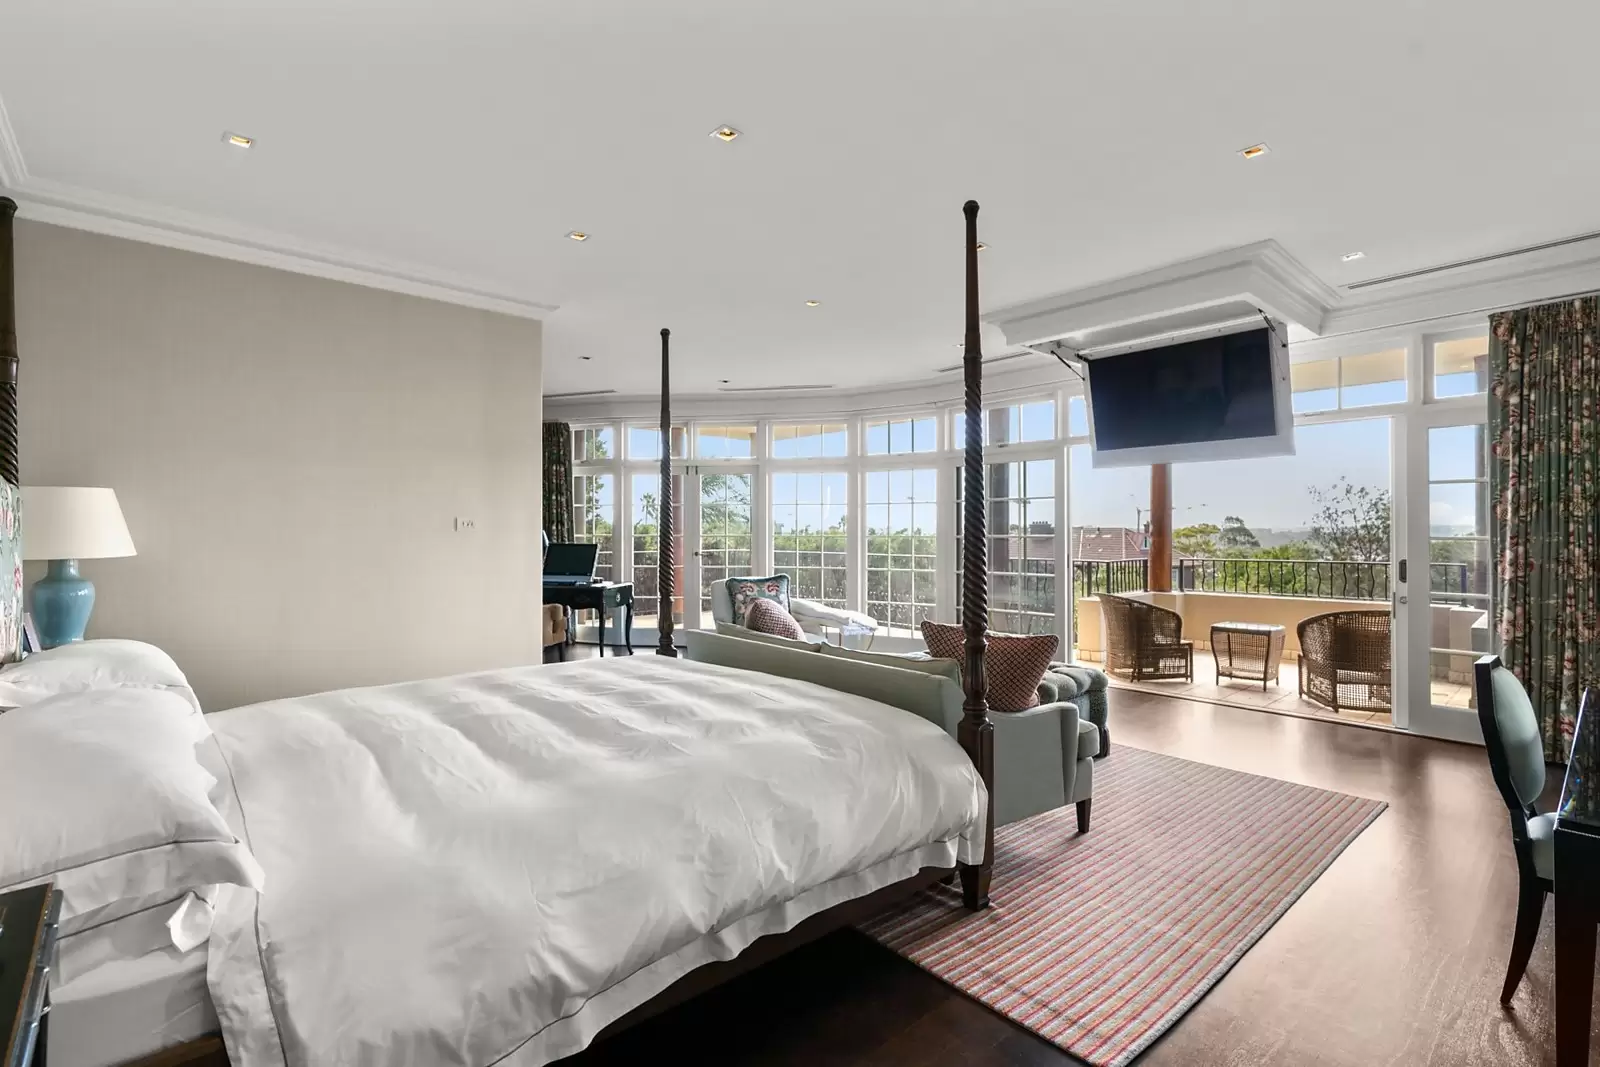 Photo #11: 47 New South Head Road, Vaucluse - For Sale by Sydney Sotheby's International Realty